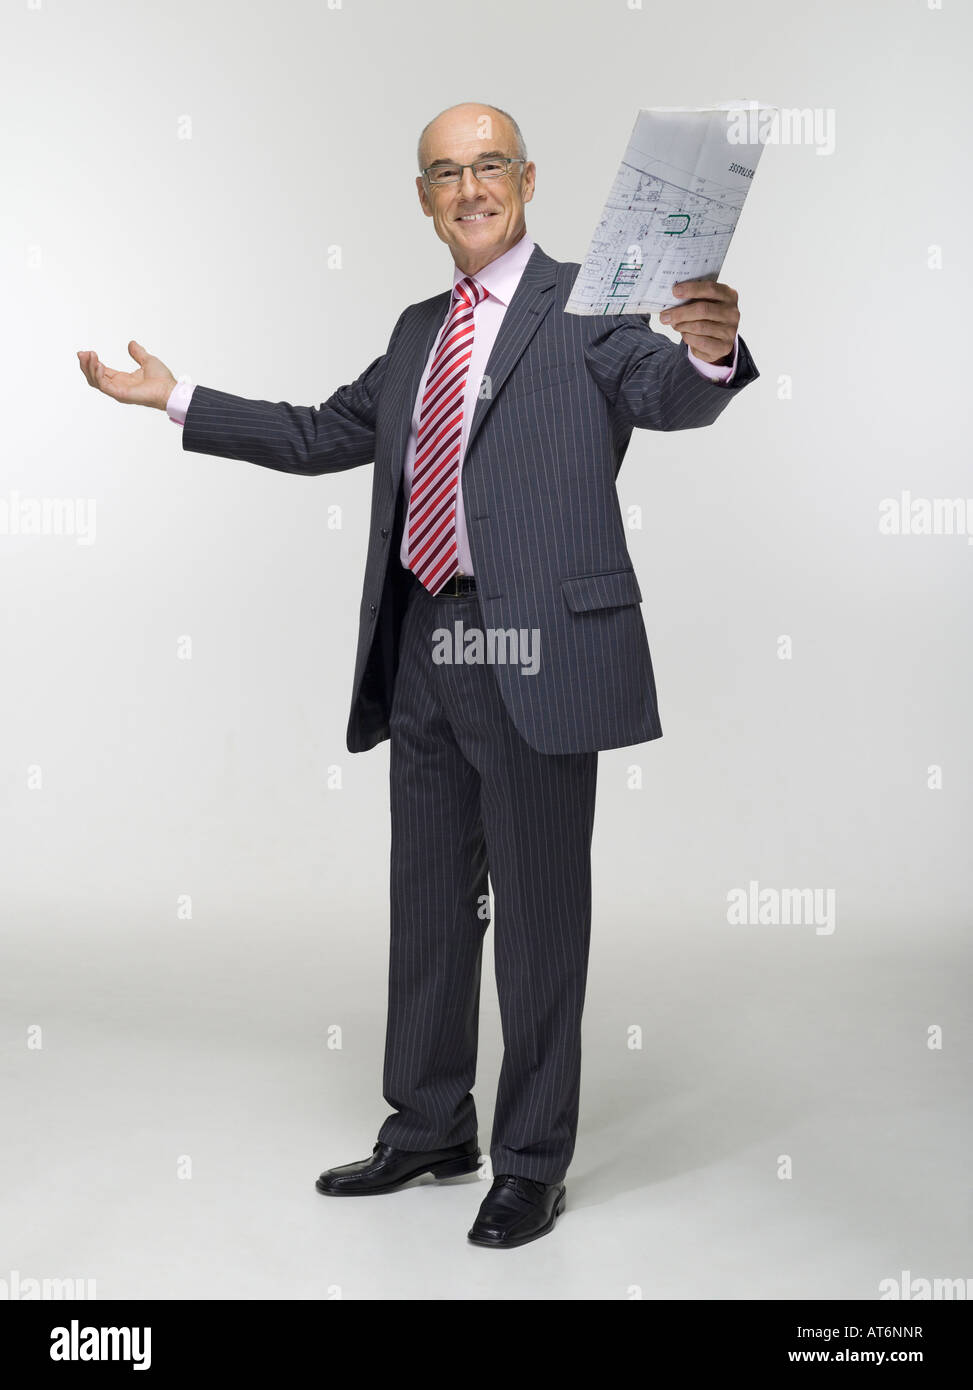 Businessman Slip and Fall and a Funny Pose Stock Image - Image of arms,  adult: 40738507